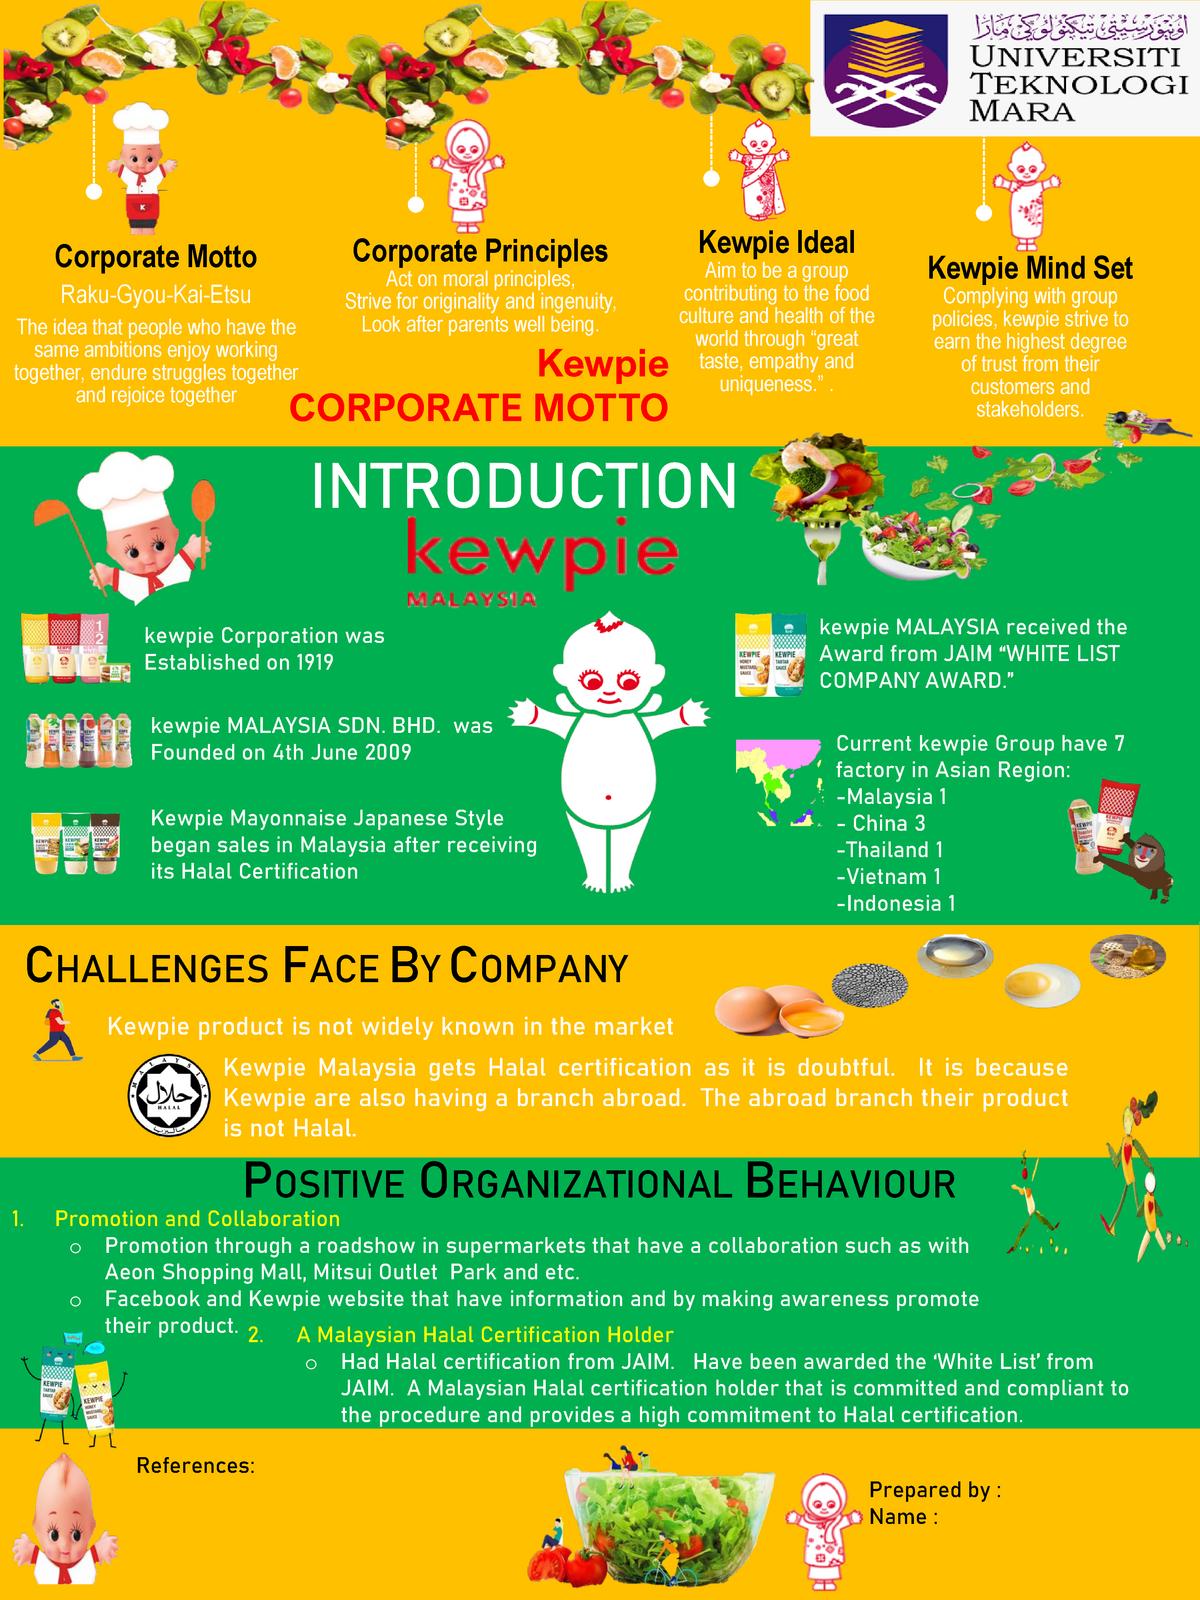 Charles and keith infographic - operation management - UiTM - Studocu